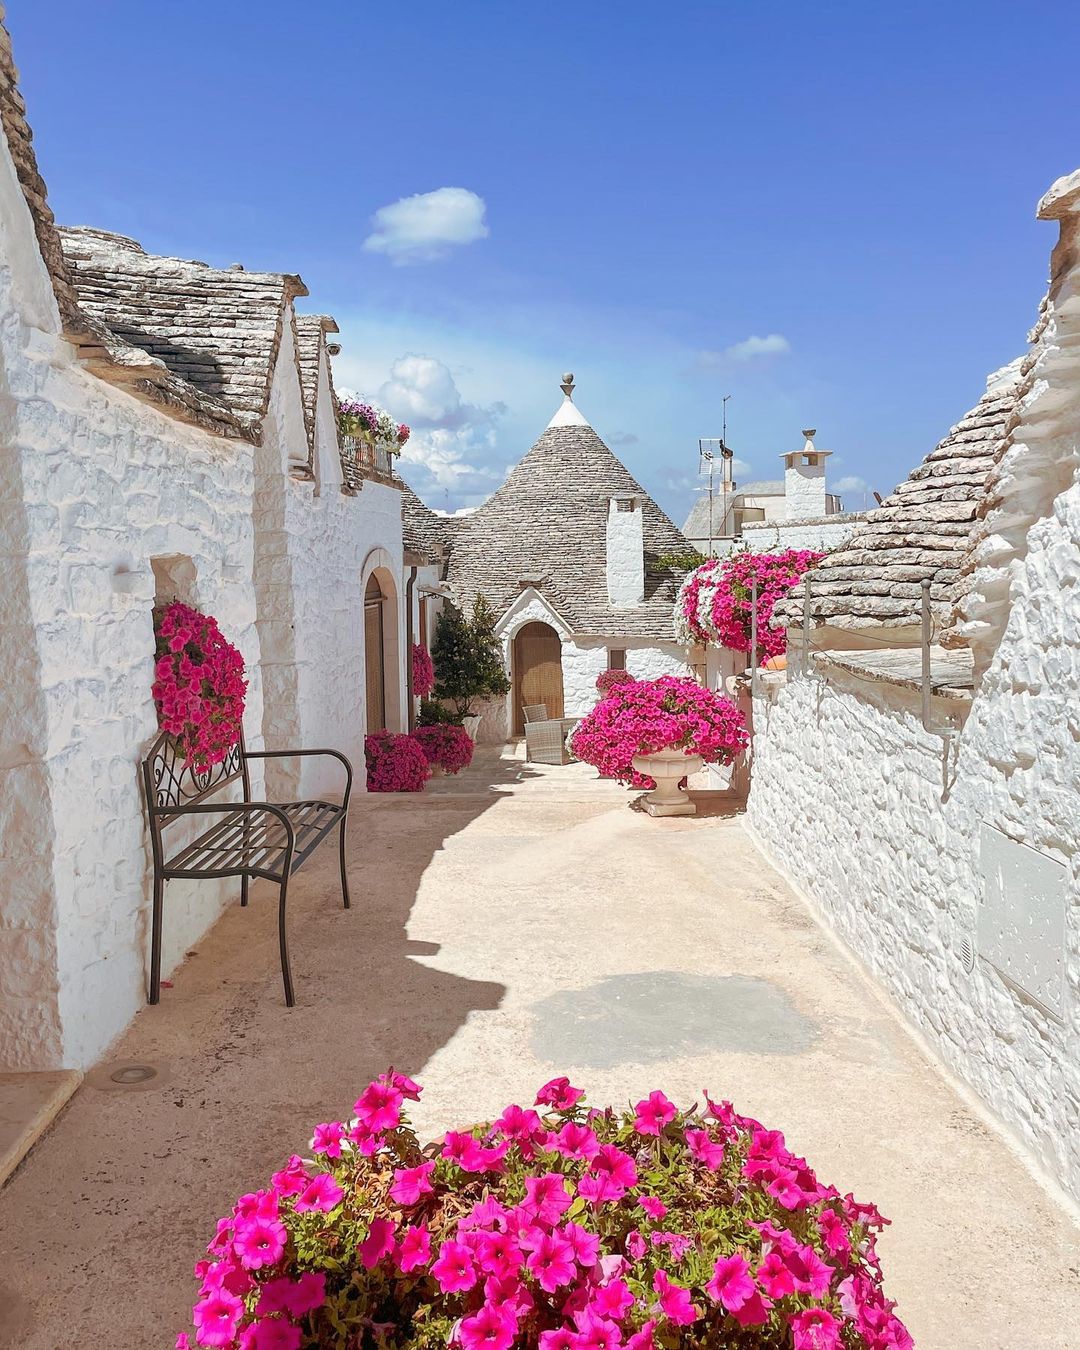 The trulli of Alberobello - 15 of the Prettiest Towns and Villages in Italy